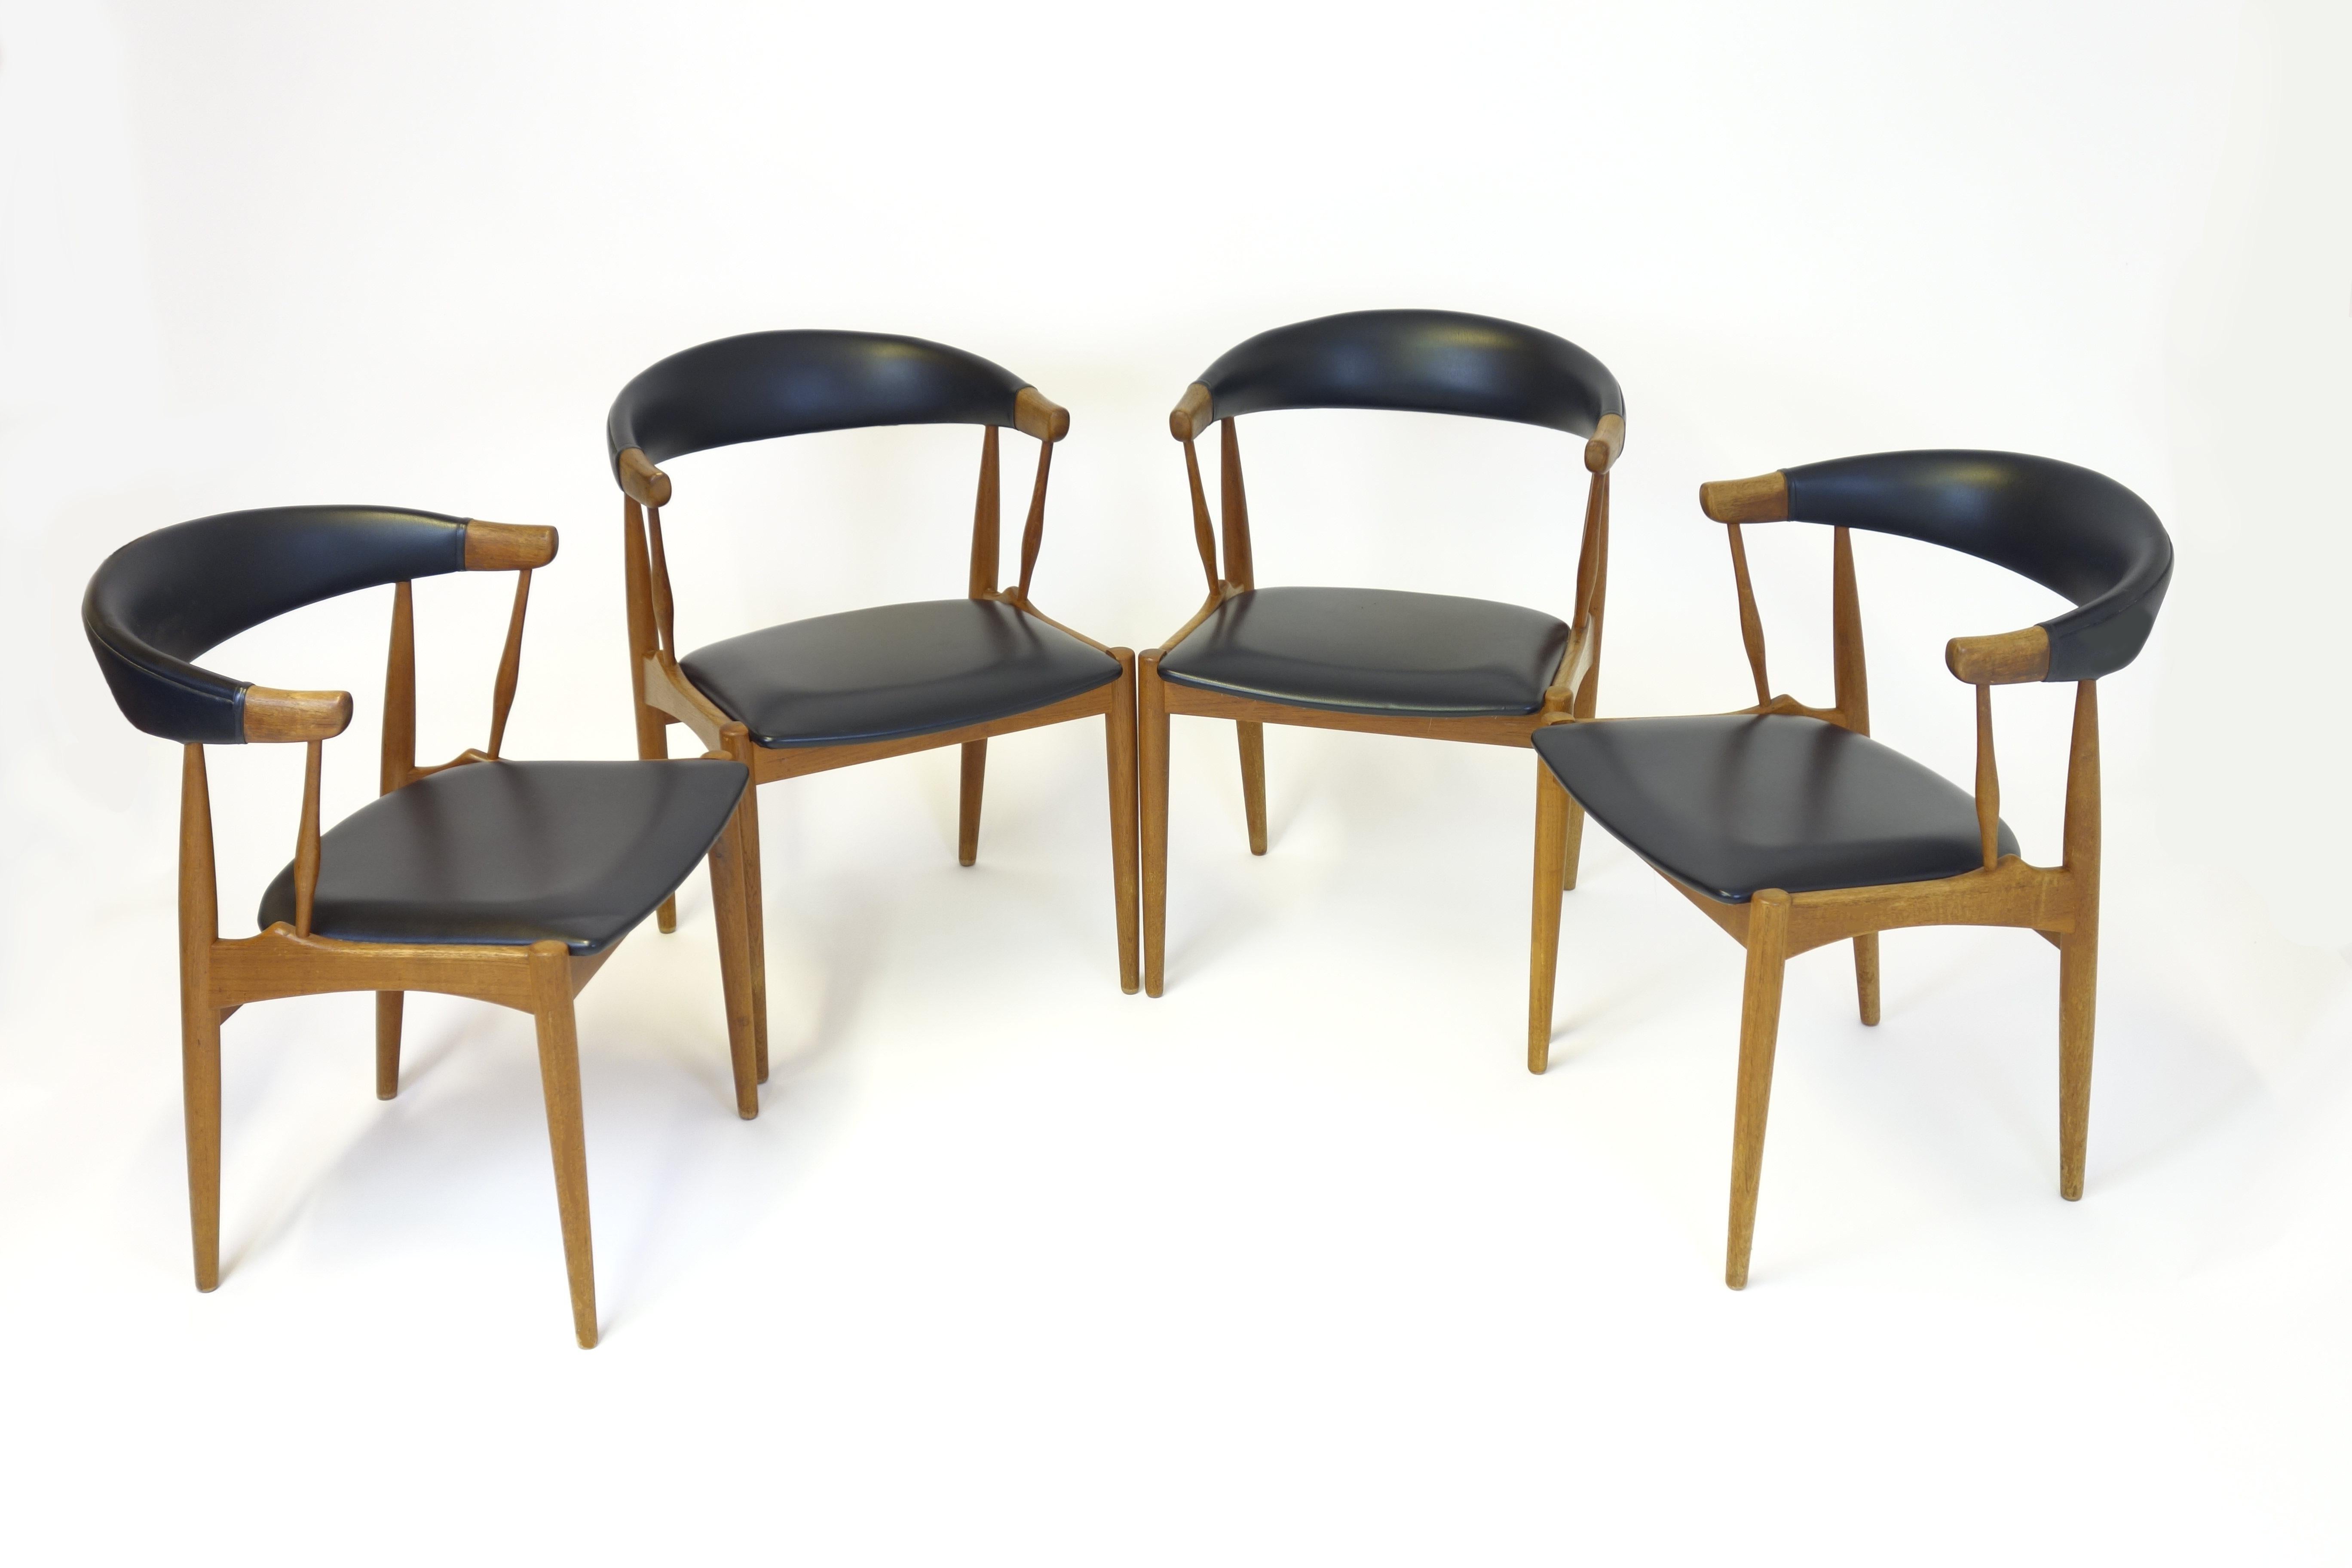 Extraordinary dining room set designed by Johannes Andersen, Denmark, 1960s. It is manufactured of solid teakwood and consists of a dining table with a diameter of 110cm. Its length can be enlarged with 2 separate extensions (50cm and 30cm) allowing